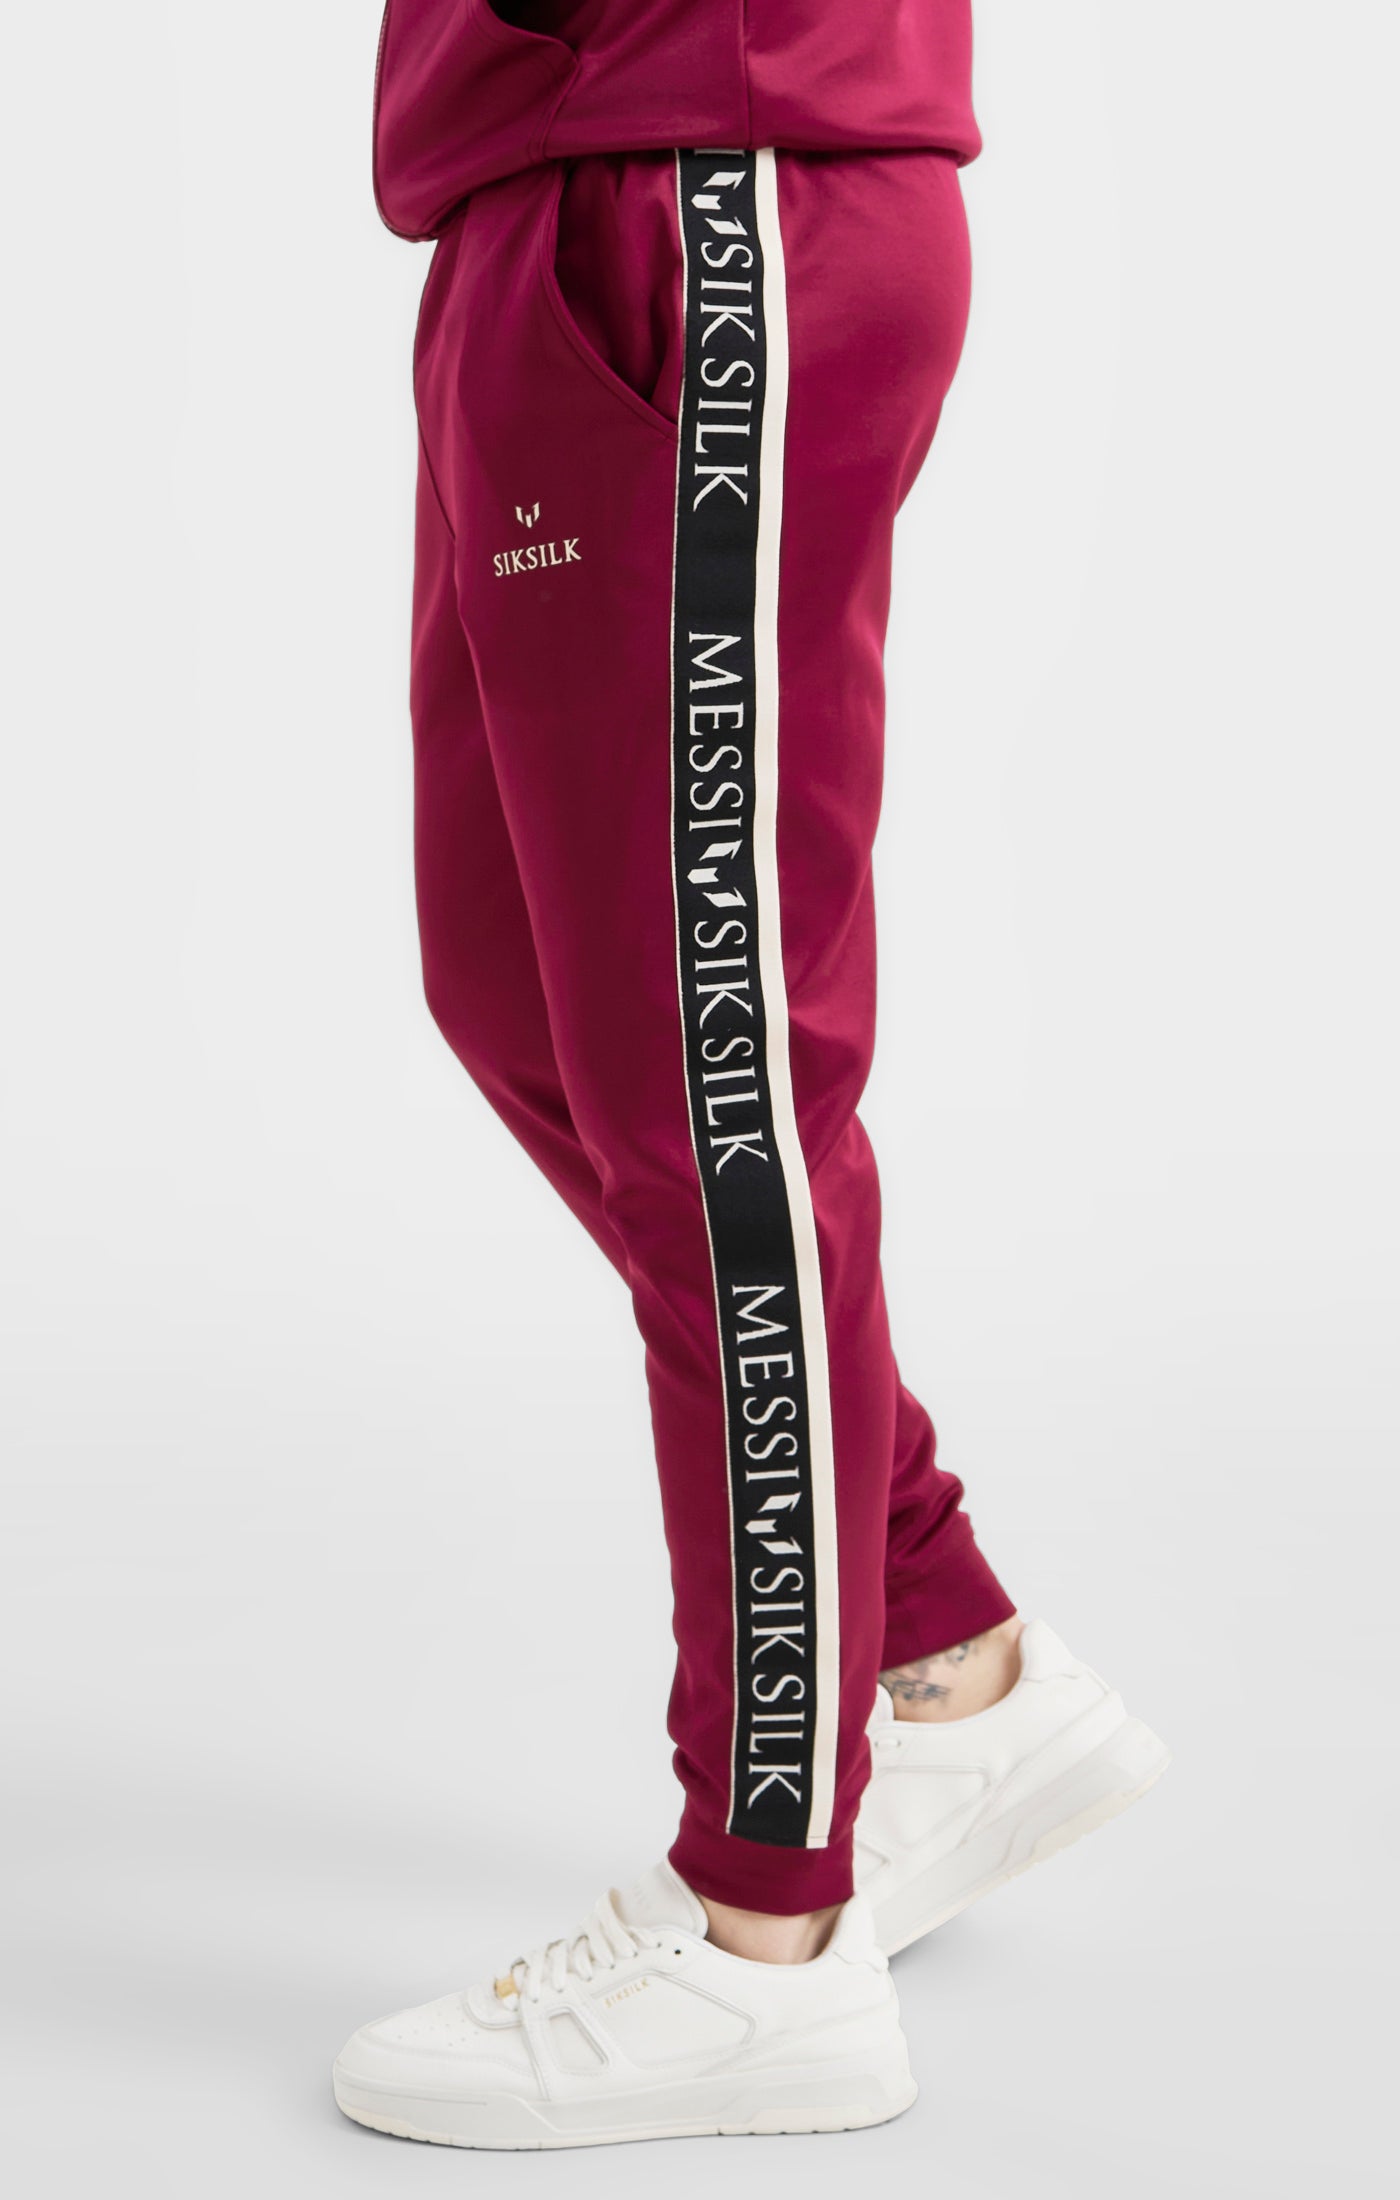 Load image into Gallery viewer, Messi x SikSilk Taped Pant - Burgundy (1)